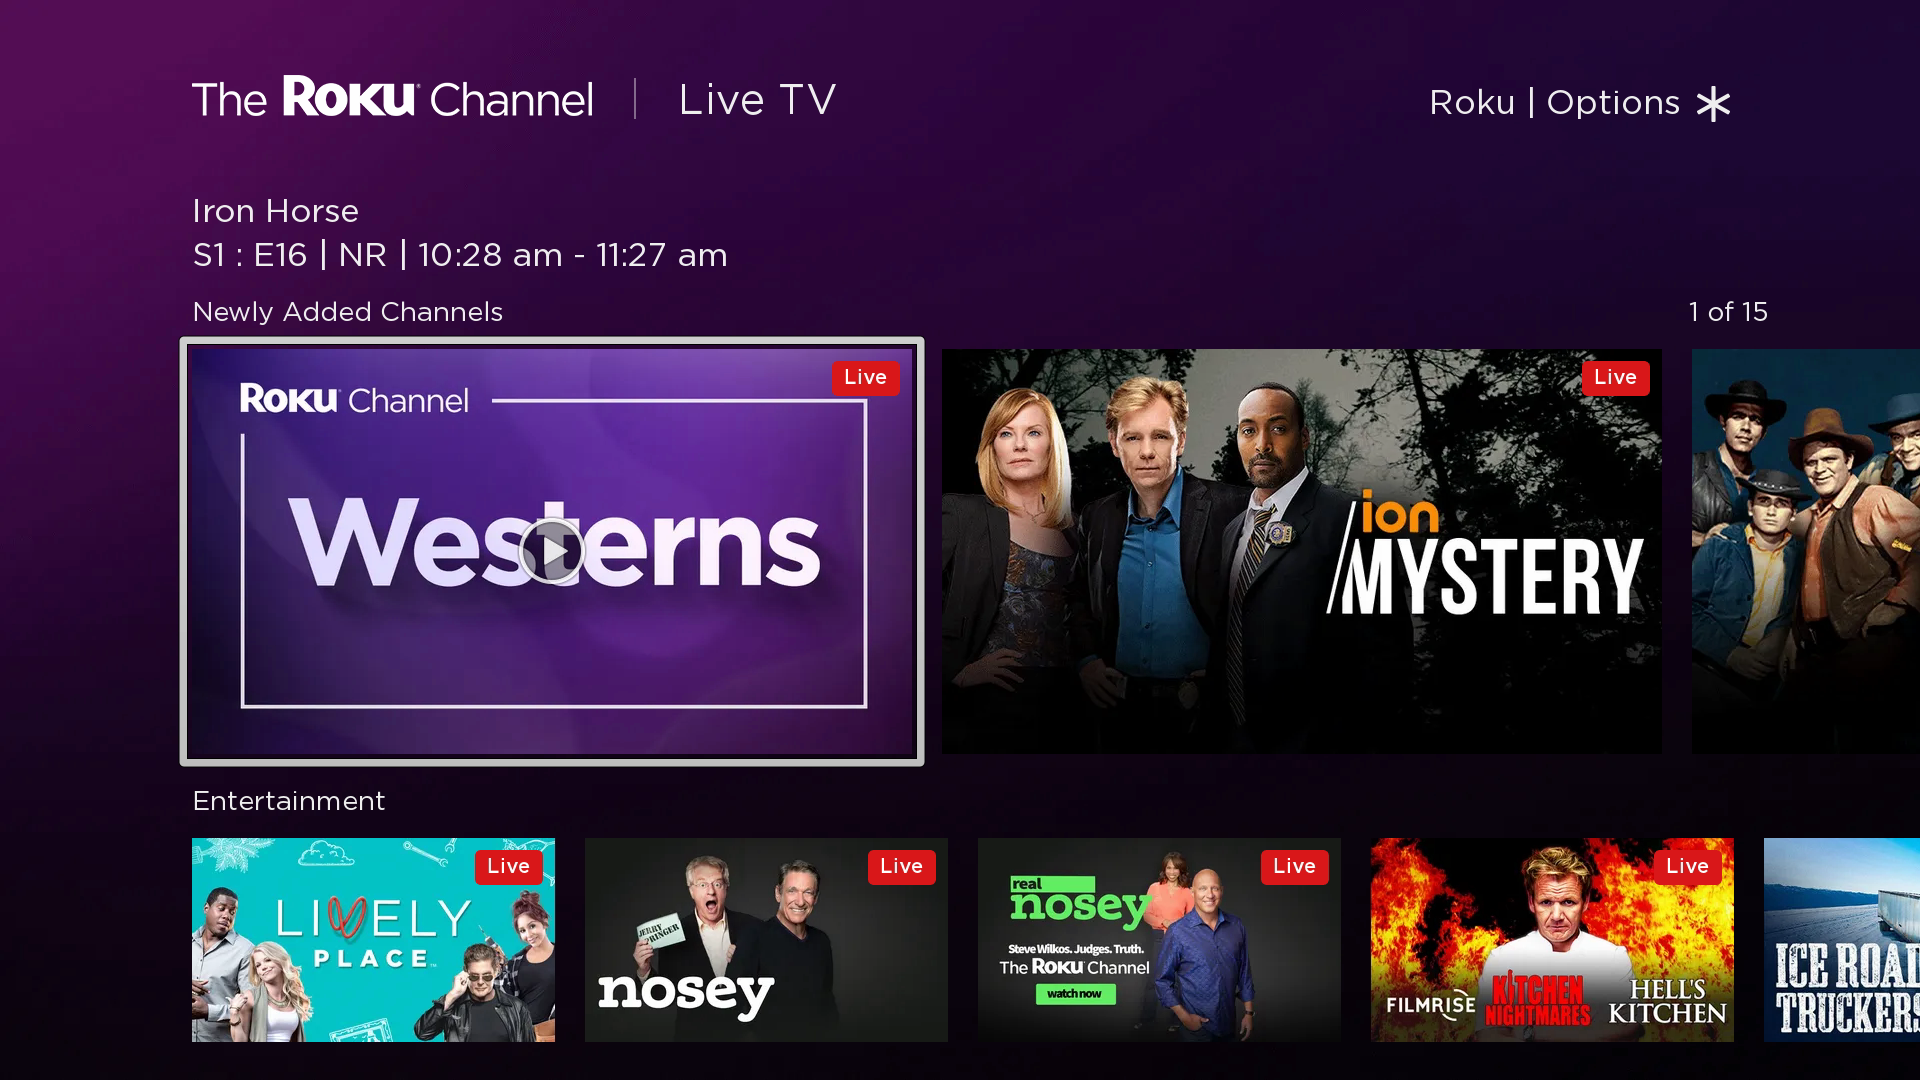 14 new live channels are now available on The Roku Channel